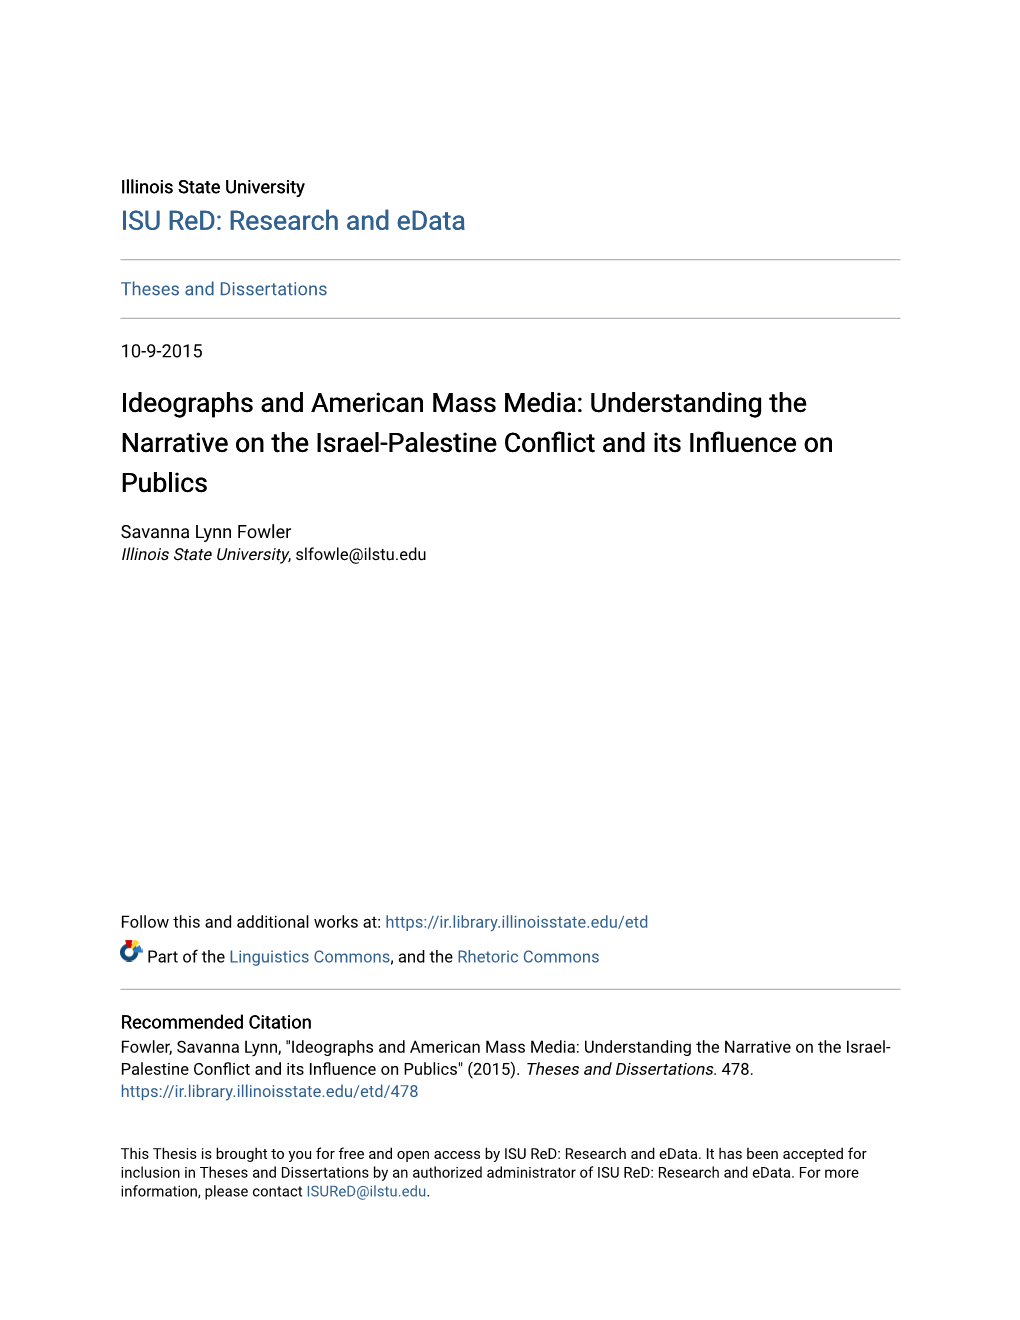 Ideographs and American Mass Media: Understanding the Narrative on the Israel-Palestine Conflict and Its Influence on Publics